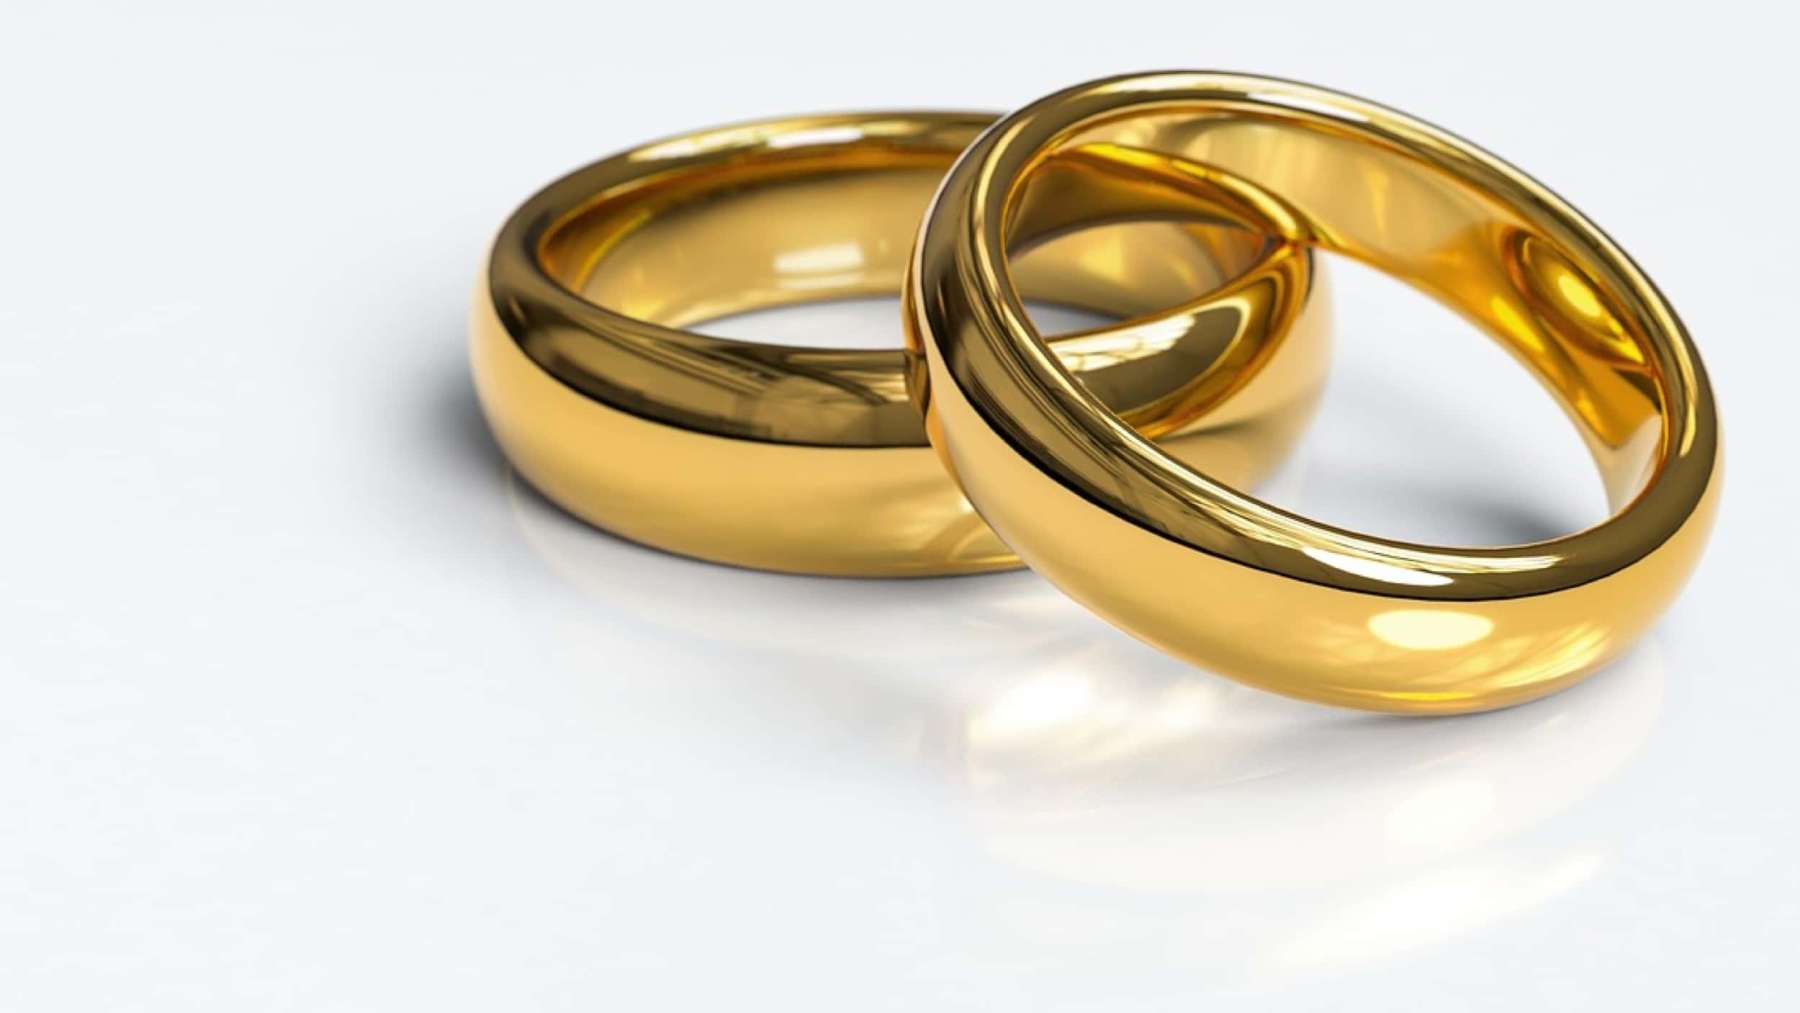 Rhode Island News: In the eyes of certain State Senators, some marriages are less worthy